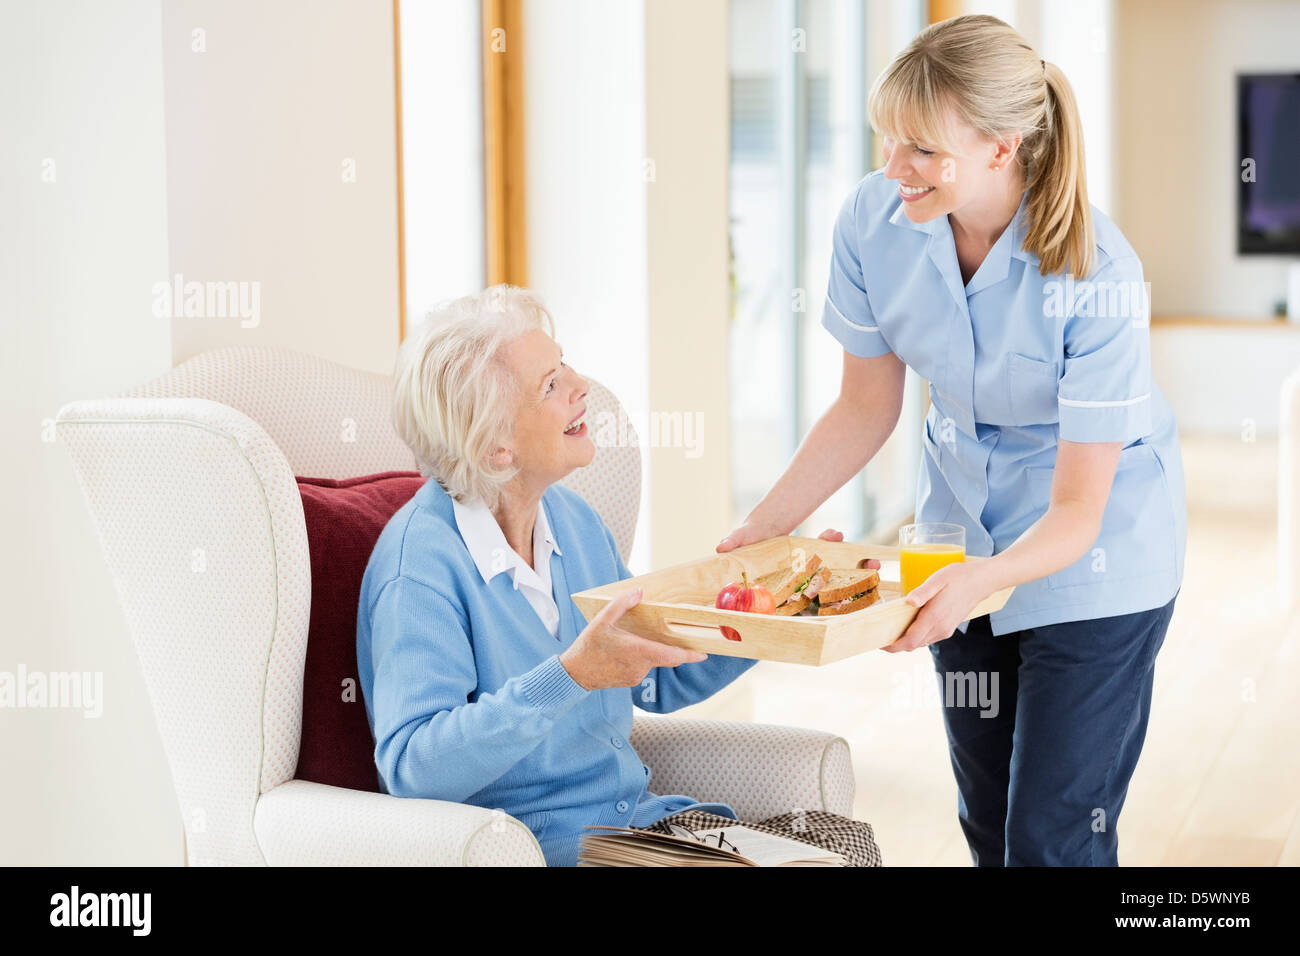 Caregiver giving older woman tray of food Stock Photo